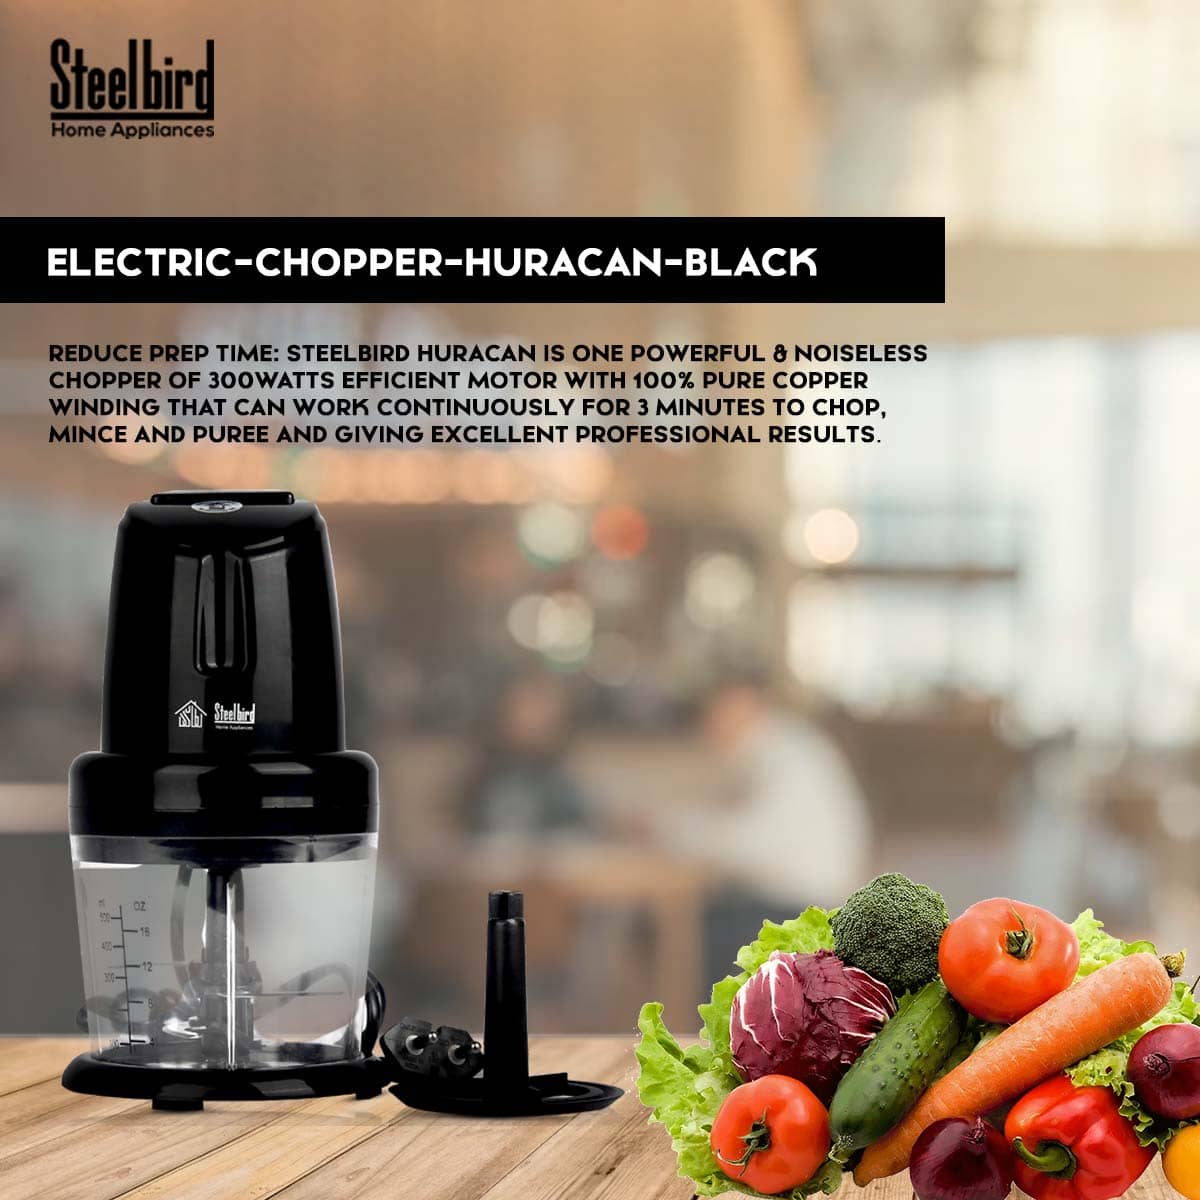 Steelbird Huracan - 300 Watts Electric Chopper with Copper Motor, Chop, Mince, Puree, Whisk, 800 ml Capacity, One Touch Operation (Black)